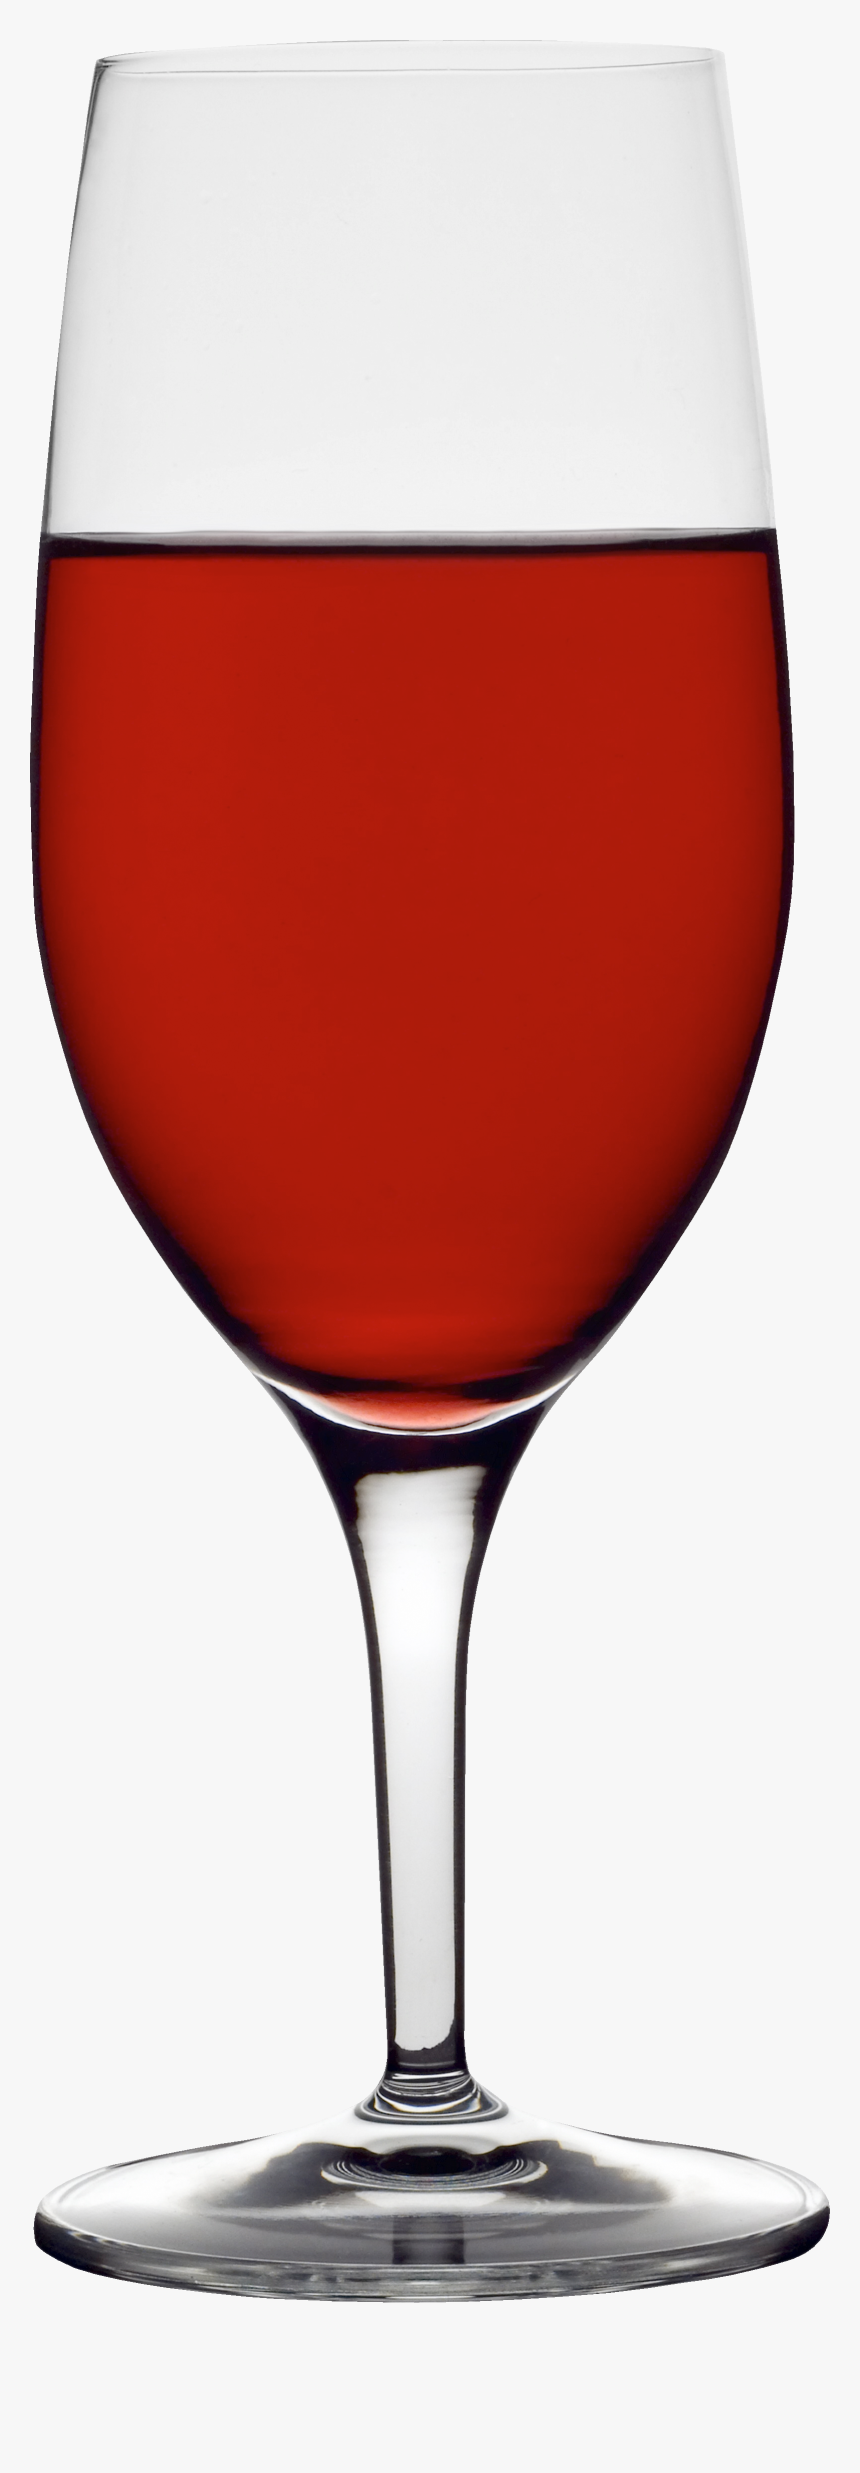 Glass Png Image - Png Clipart Glass Wine, Transparent Png, Free Download